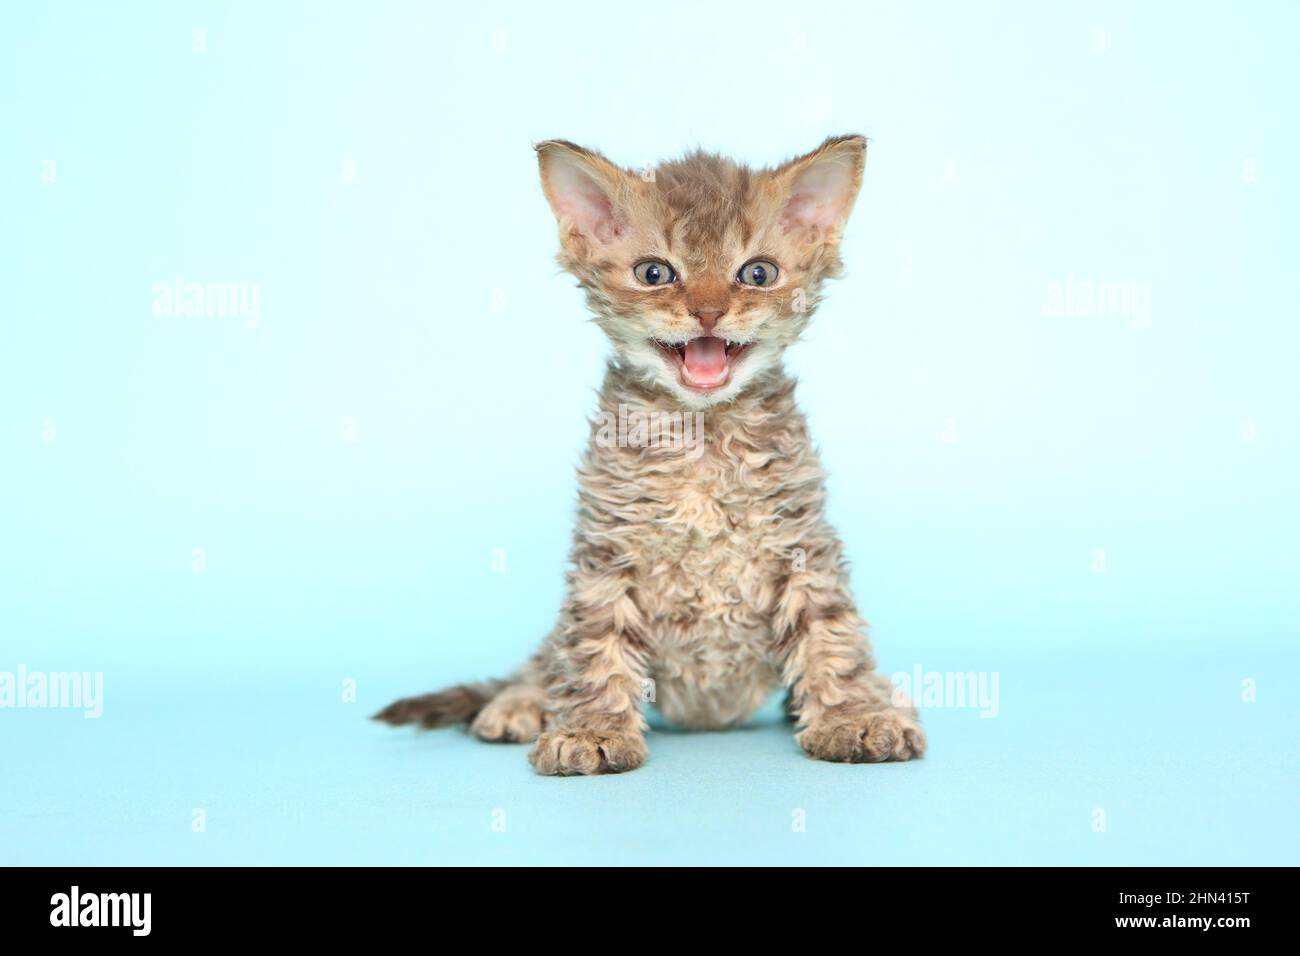 Selkirk Rex. Kitten sitting. Studio picture against a light-blue background. Germany Stock Photo